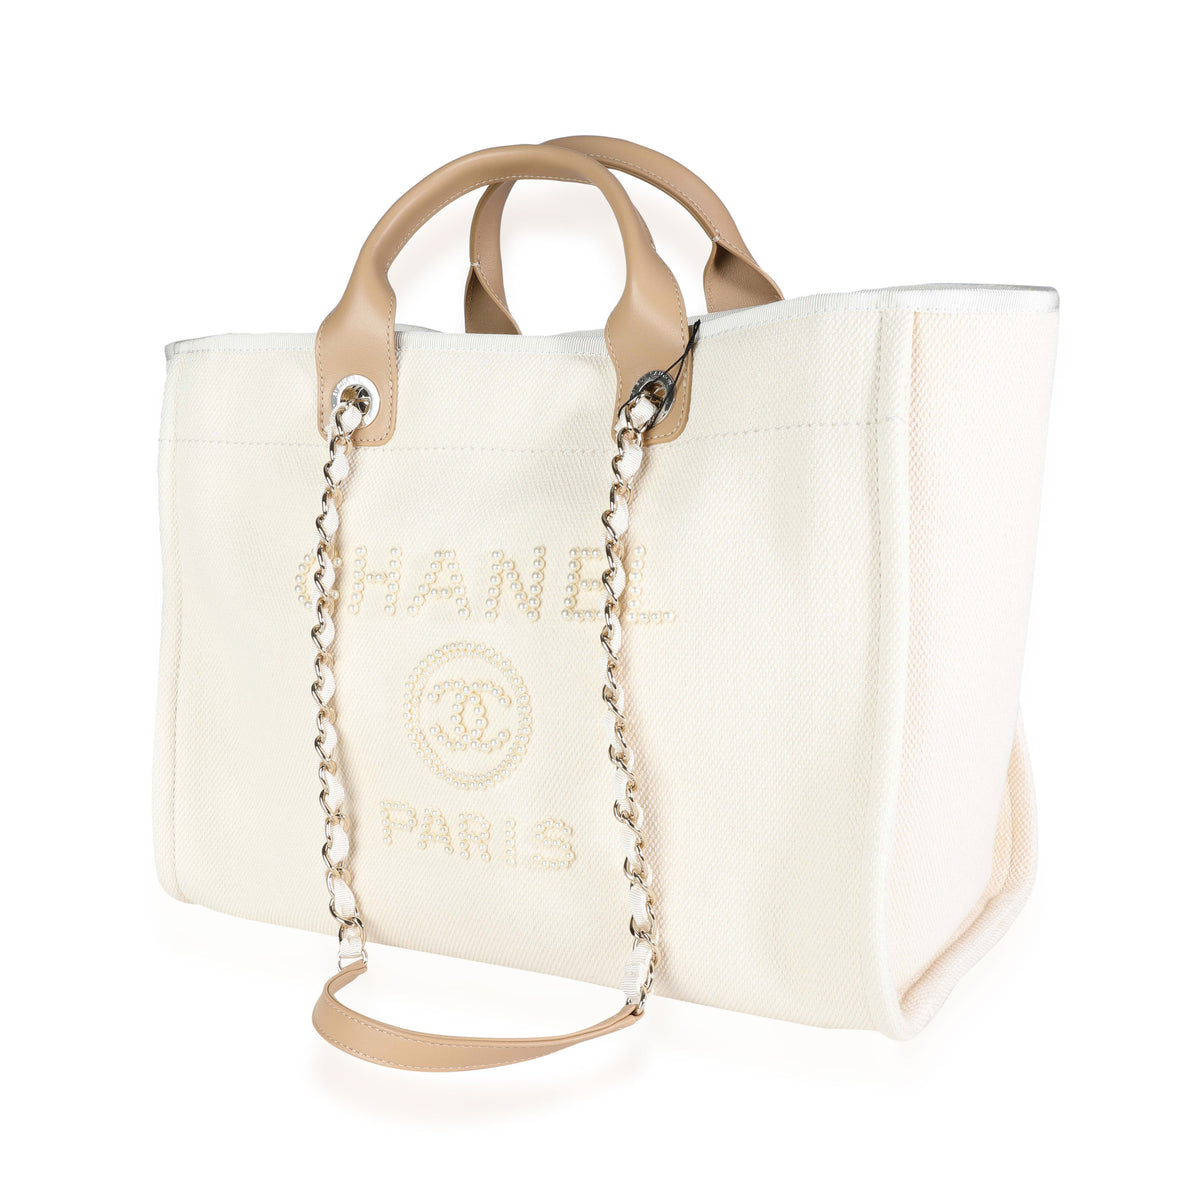 white pearl chanel bag authentic